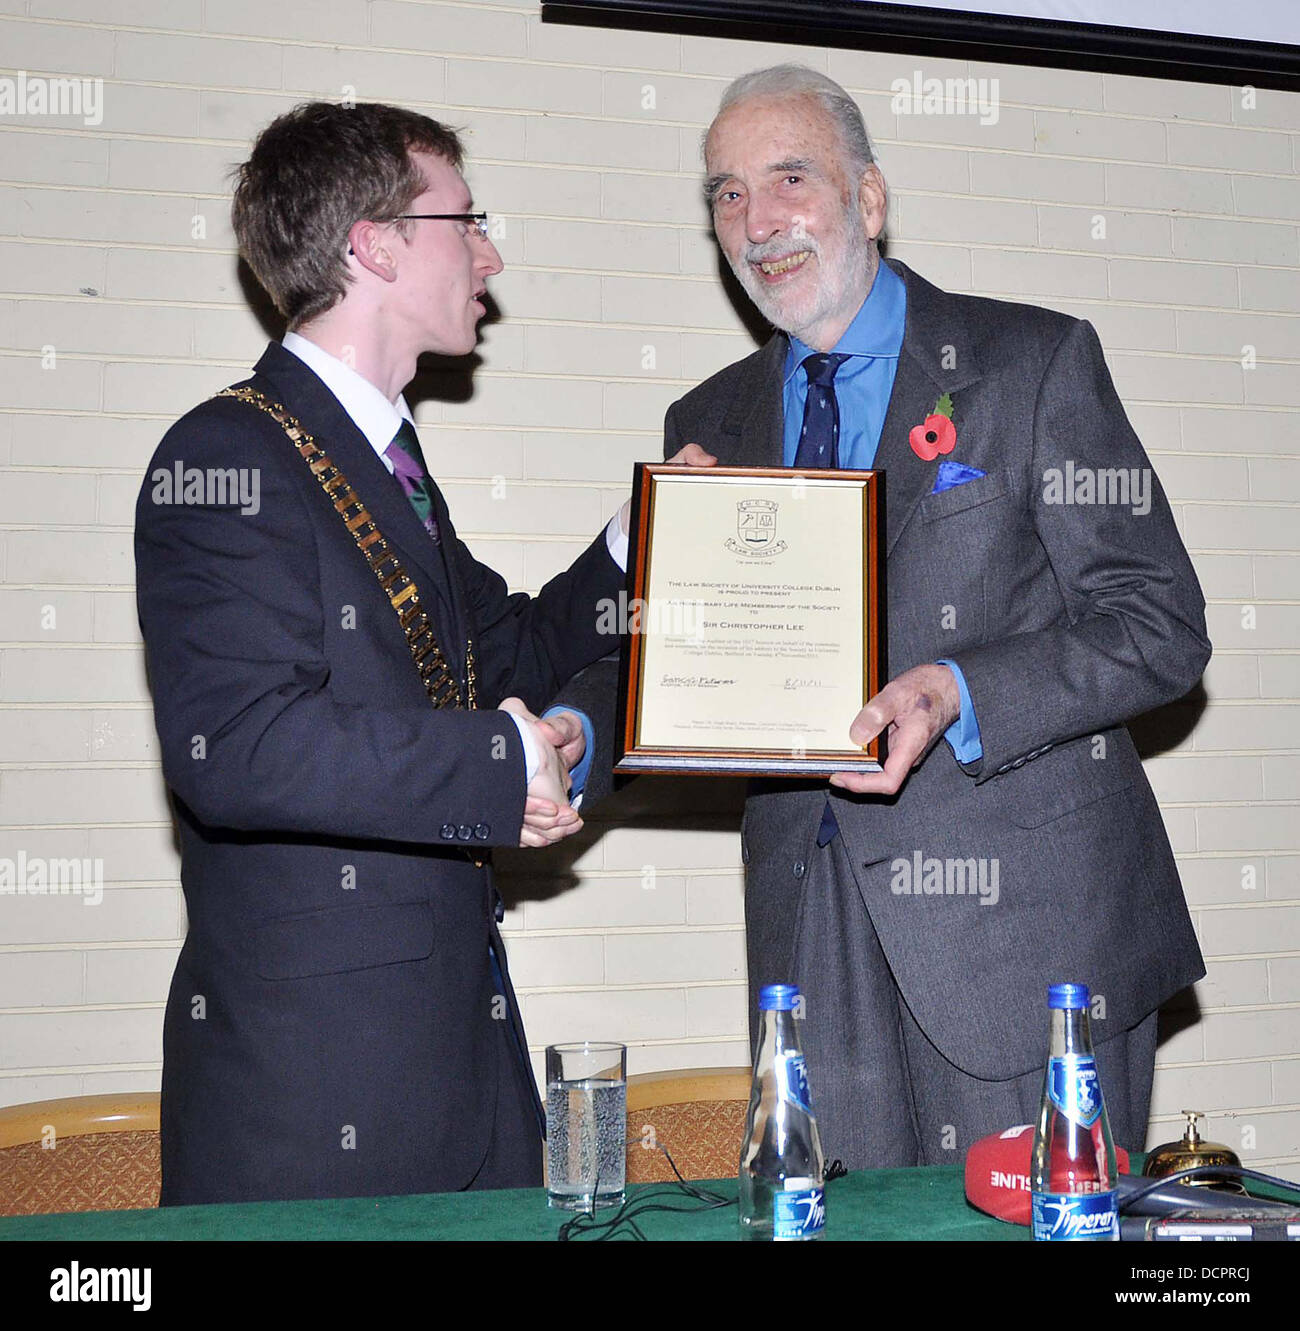 Sir Christopher Lee awarded with an Honorary Life Membership by the UCD Law Society. Dublin, Ireland - 08.11.11 Stock Photo